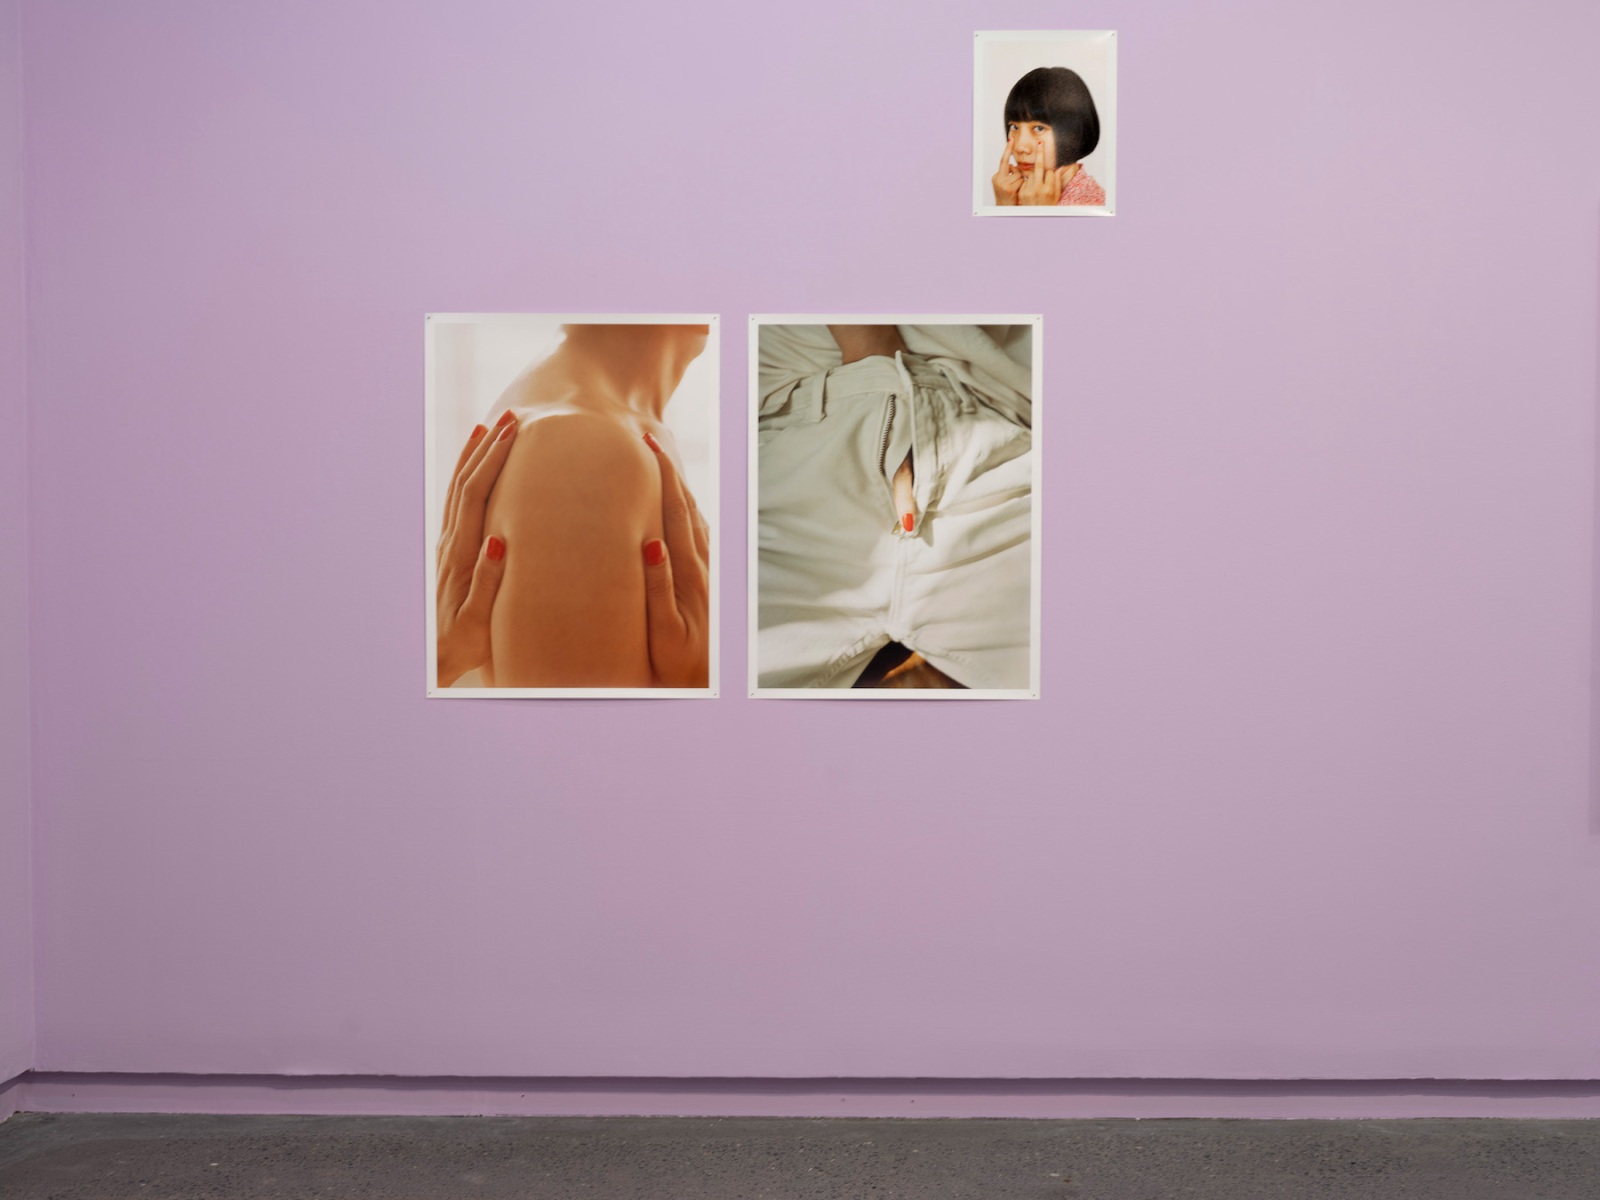 Intimate photographs of Chinese couples and individuals hang on lilac-gallery walls